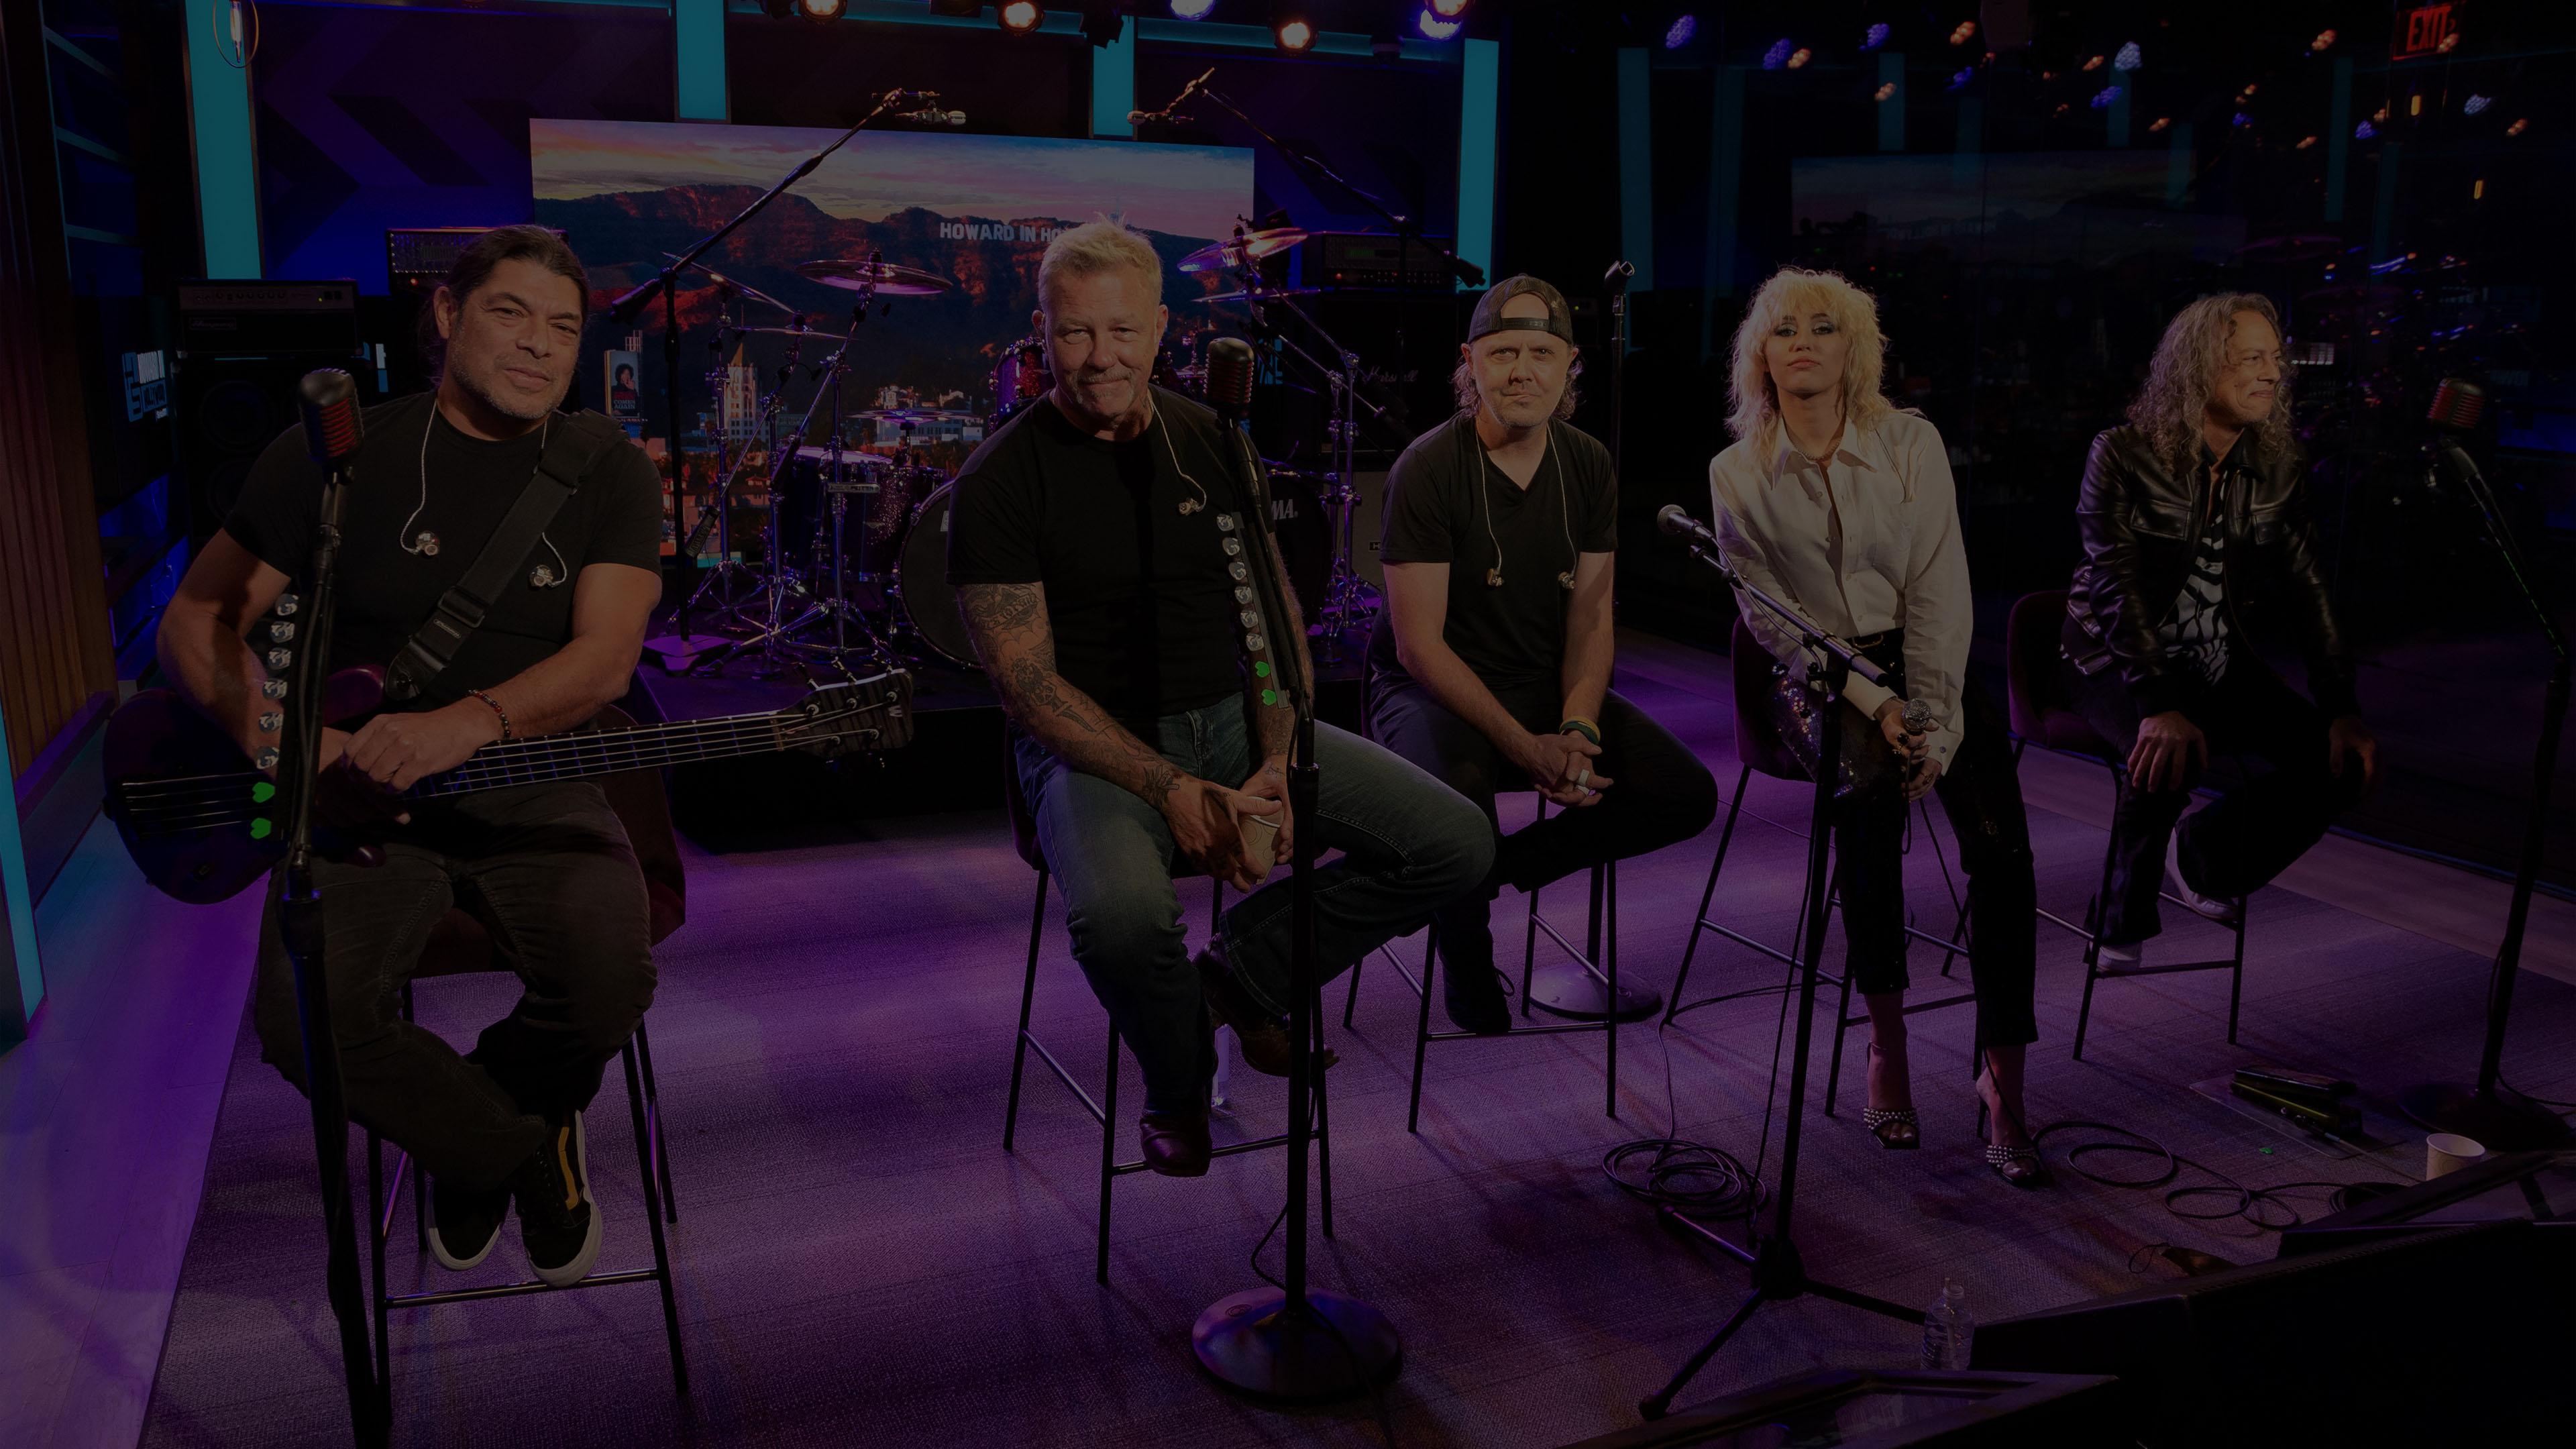 Metallica at The Howard Stern Show at SiriusXM Studios in Los Angeles, CA on September 9, 2021